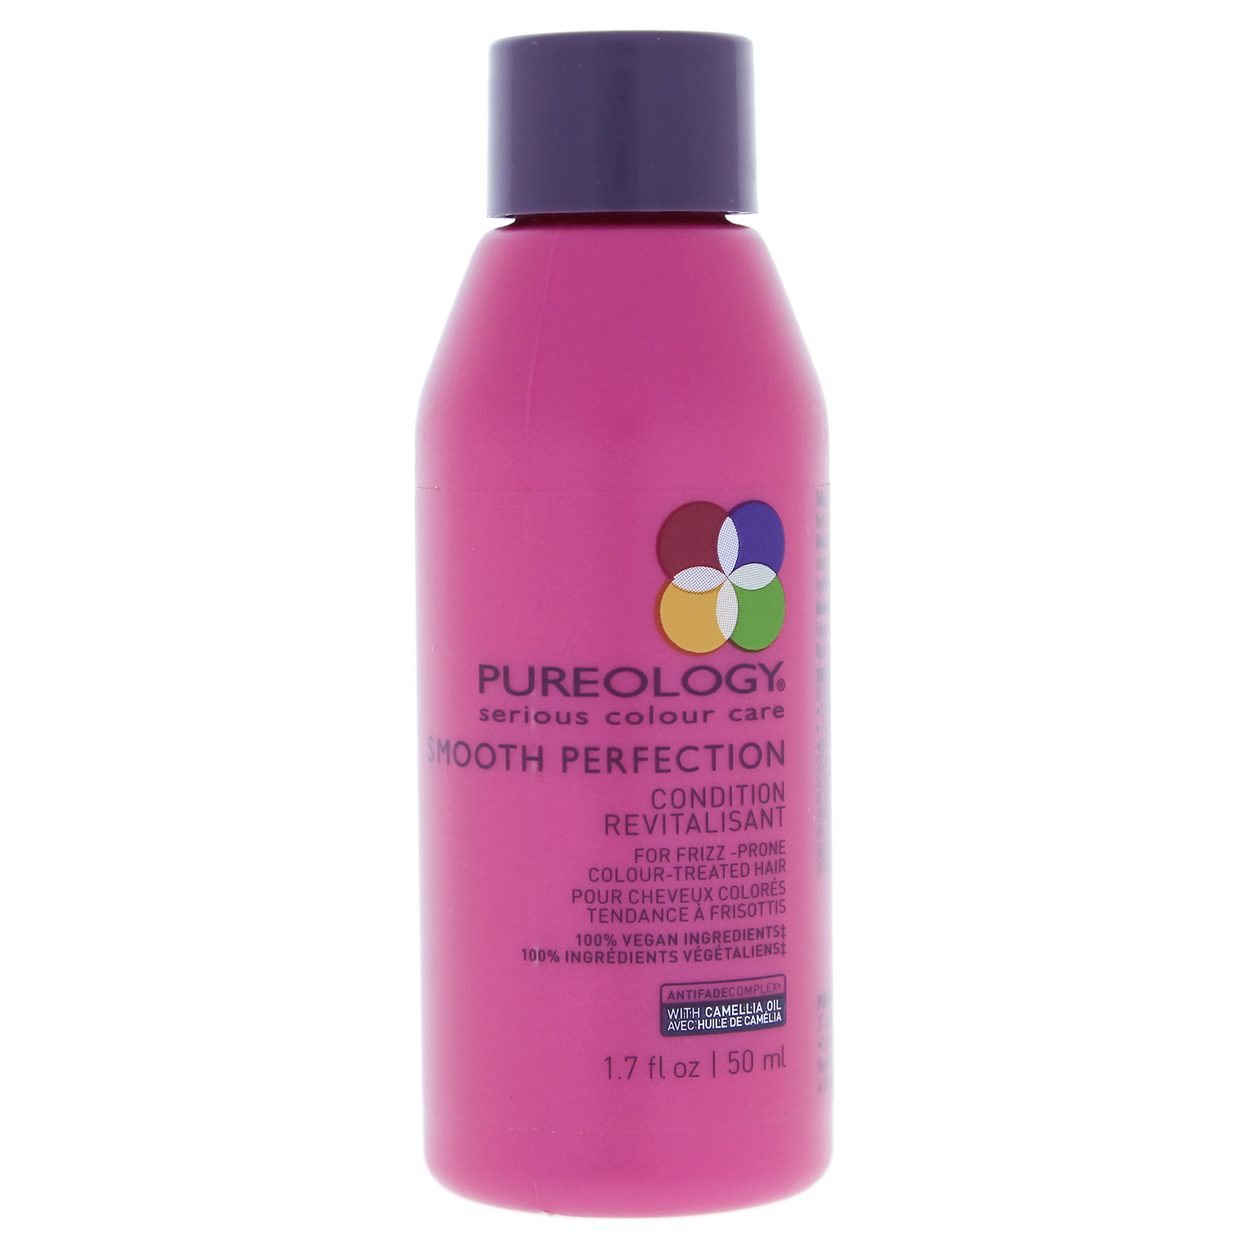 Pureology Smooth Perfection Conditioner 1.7 Oz